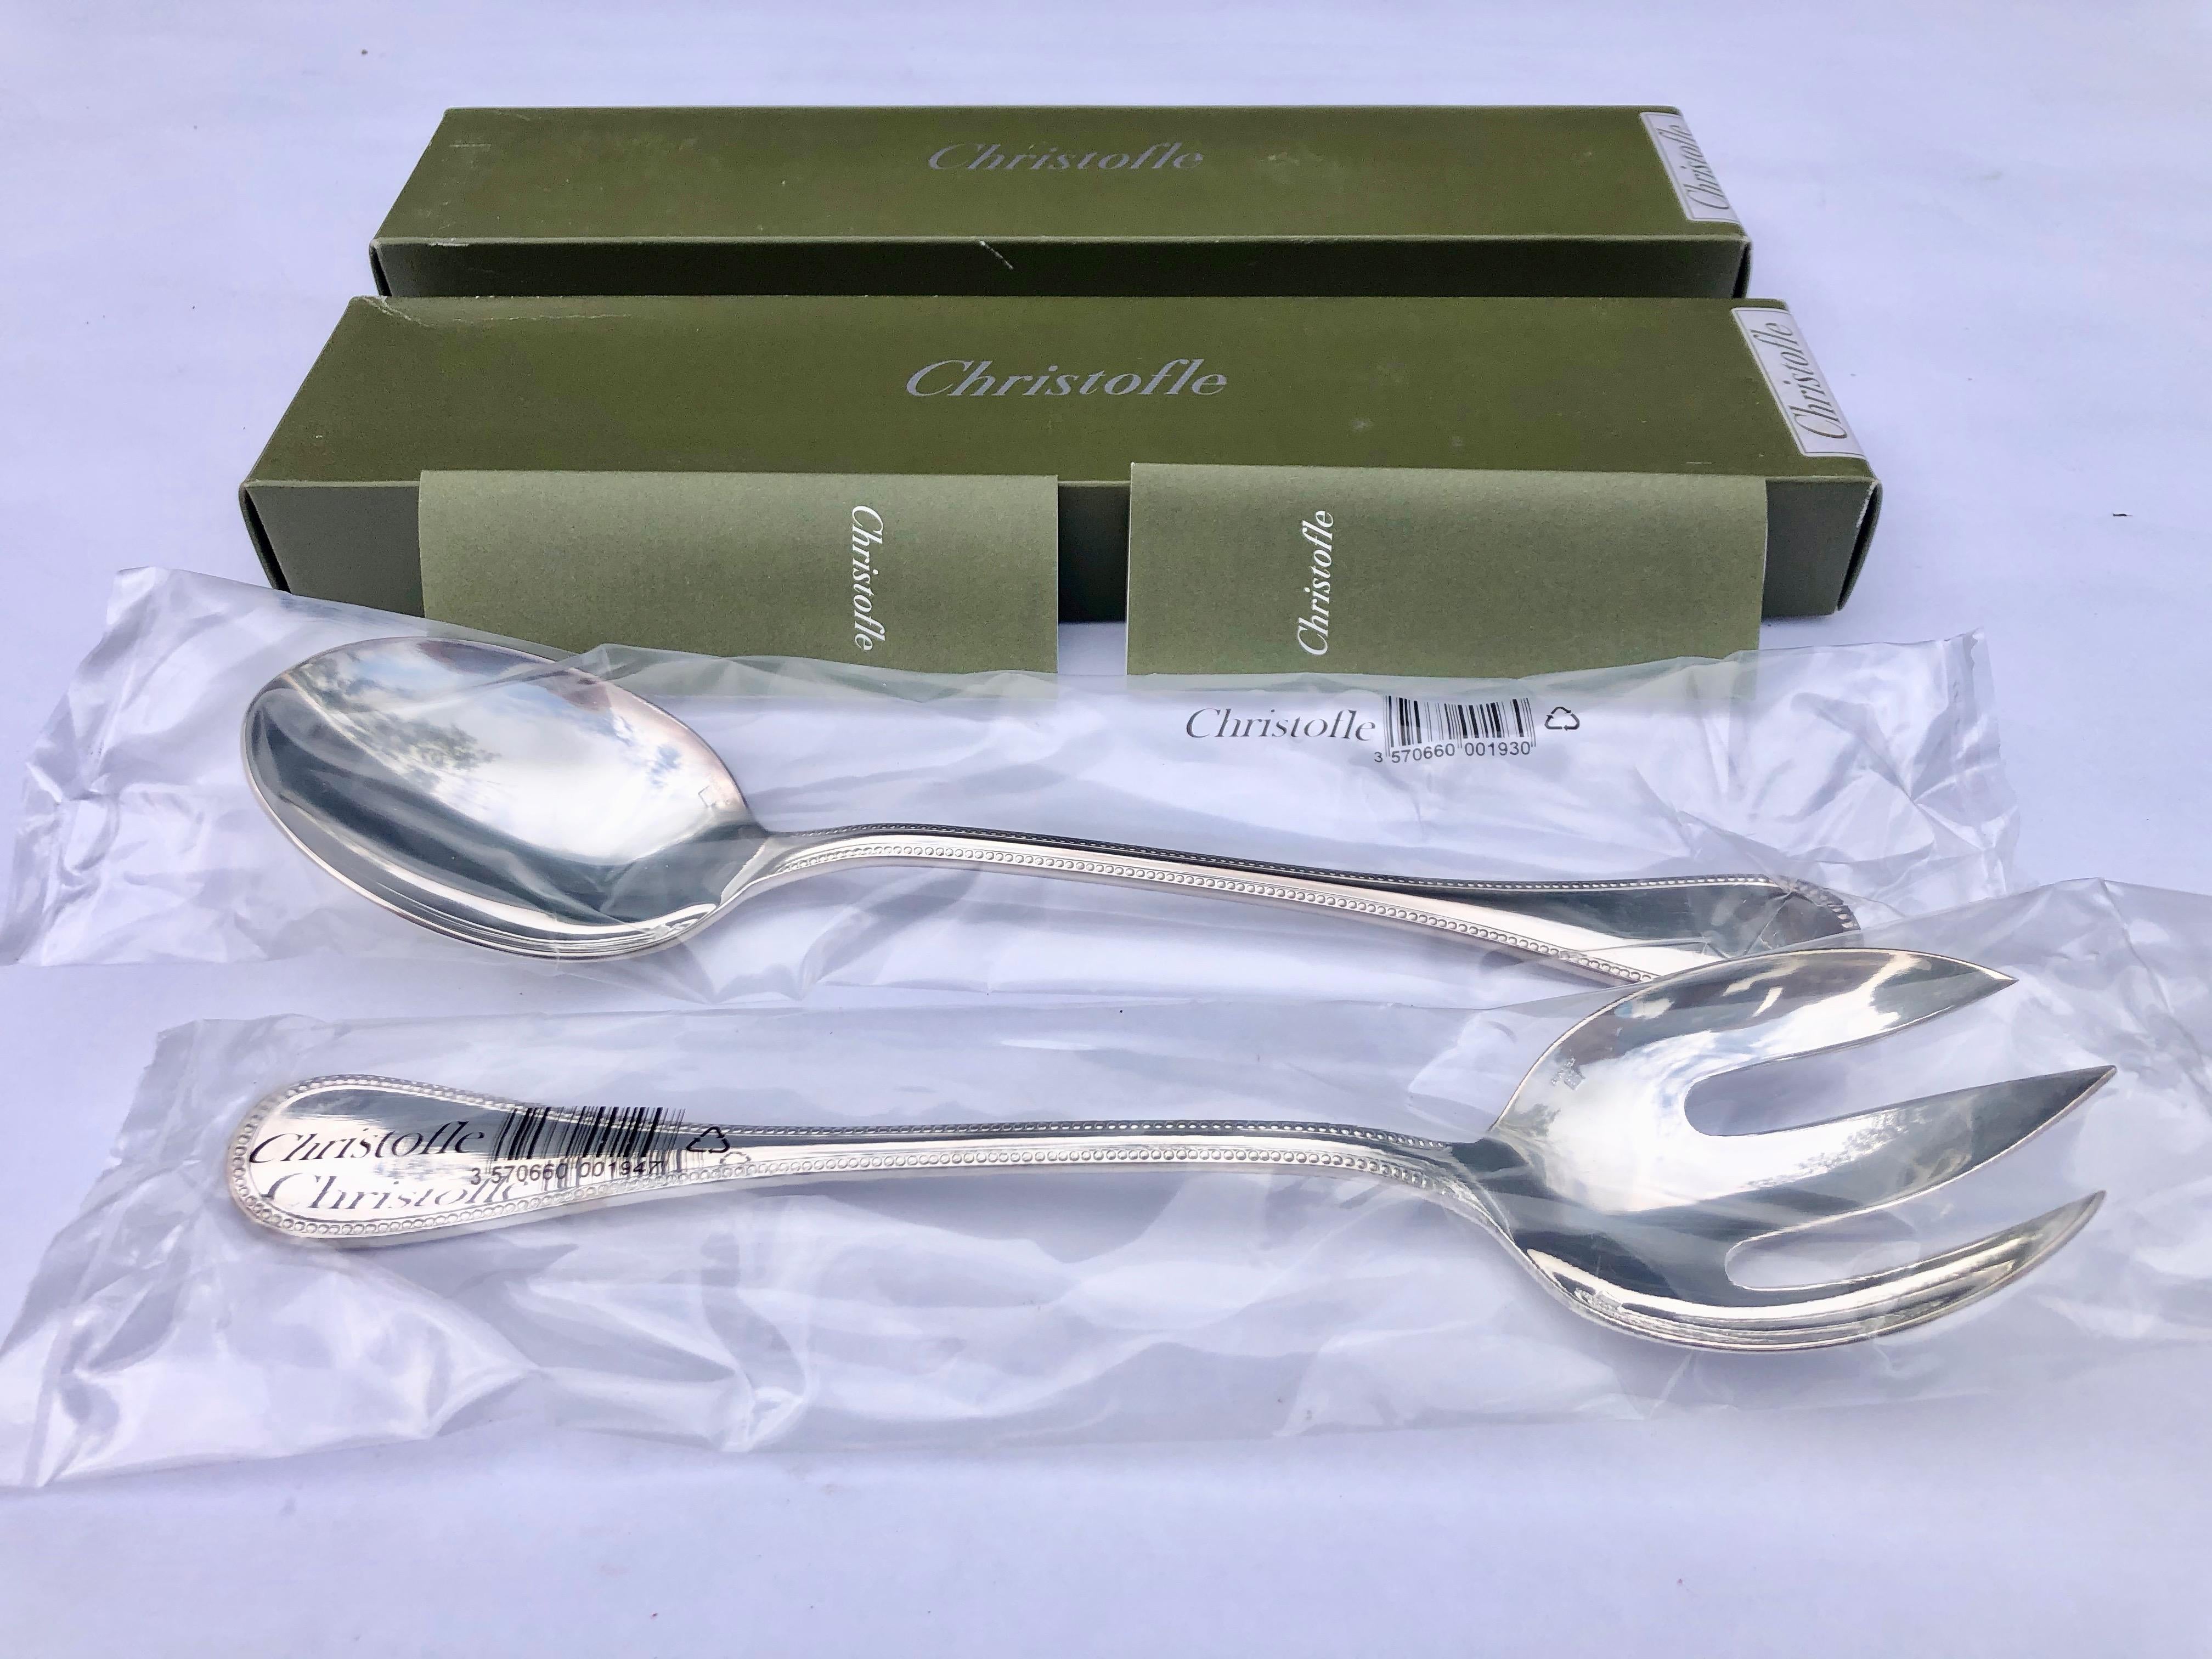 This French Christofle silver plated set is the Perles design and consists of one salad serving spoon and one serving fork. Both serving utensils are new and in their original boxes. The design is Perles.
Measures: Length 25cm each.

There are 2